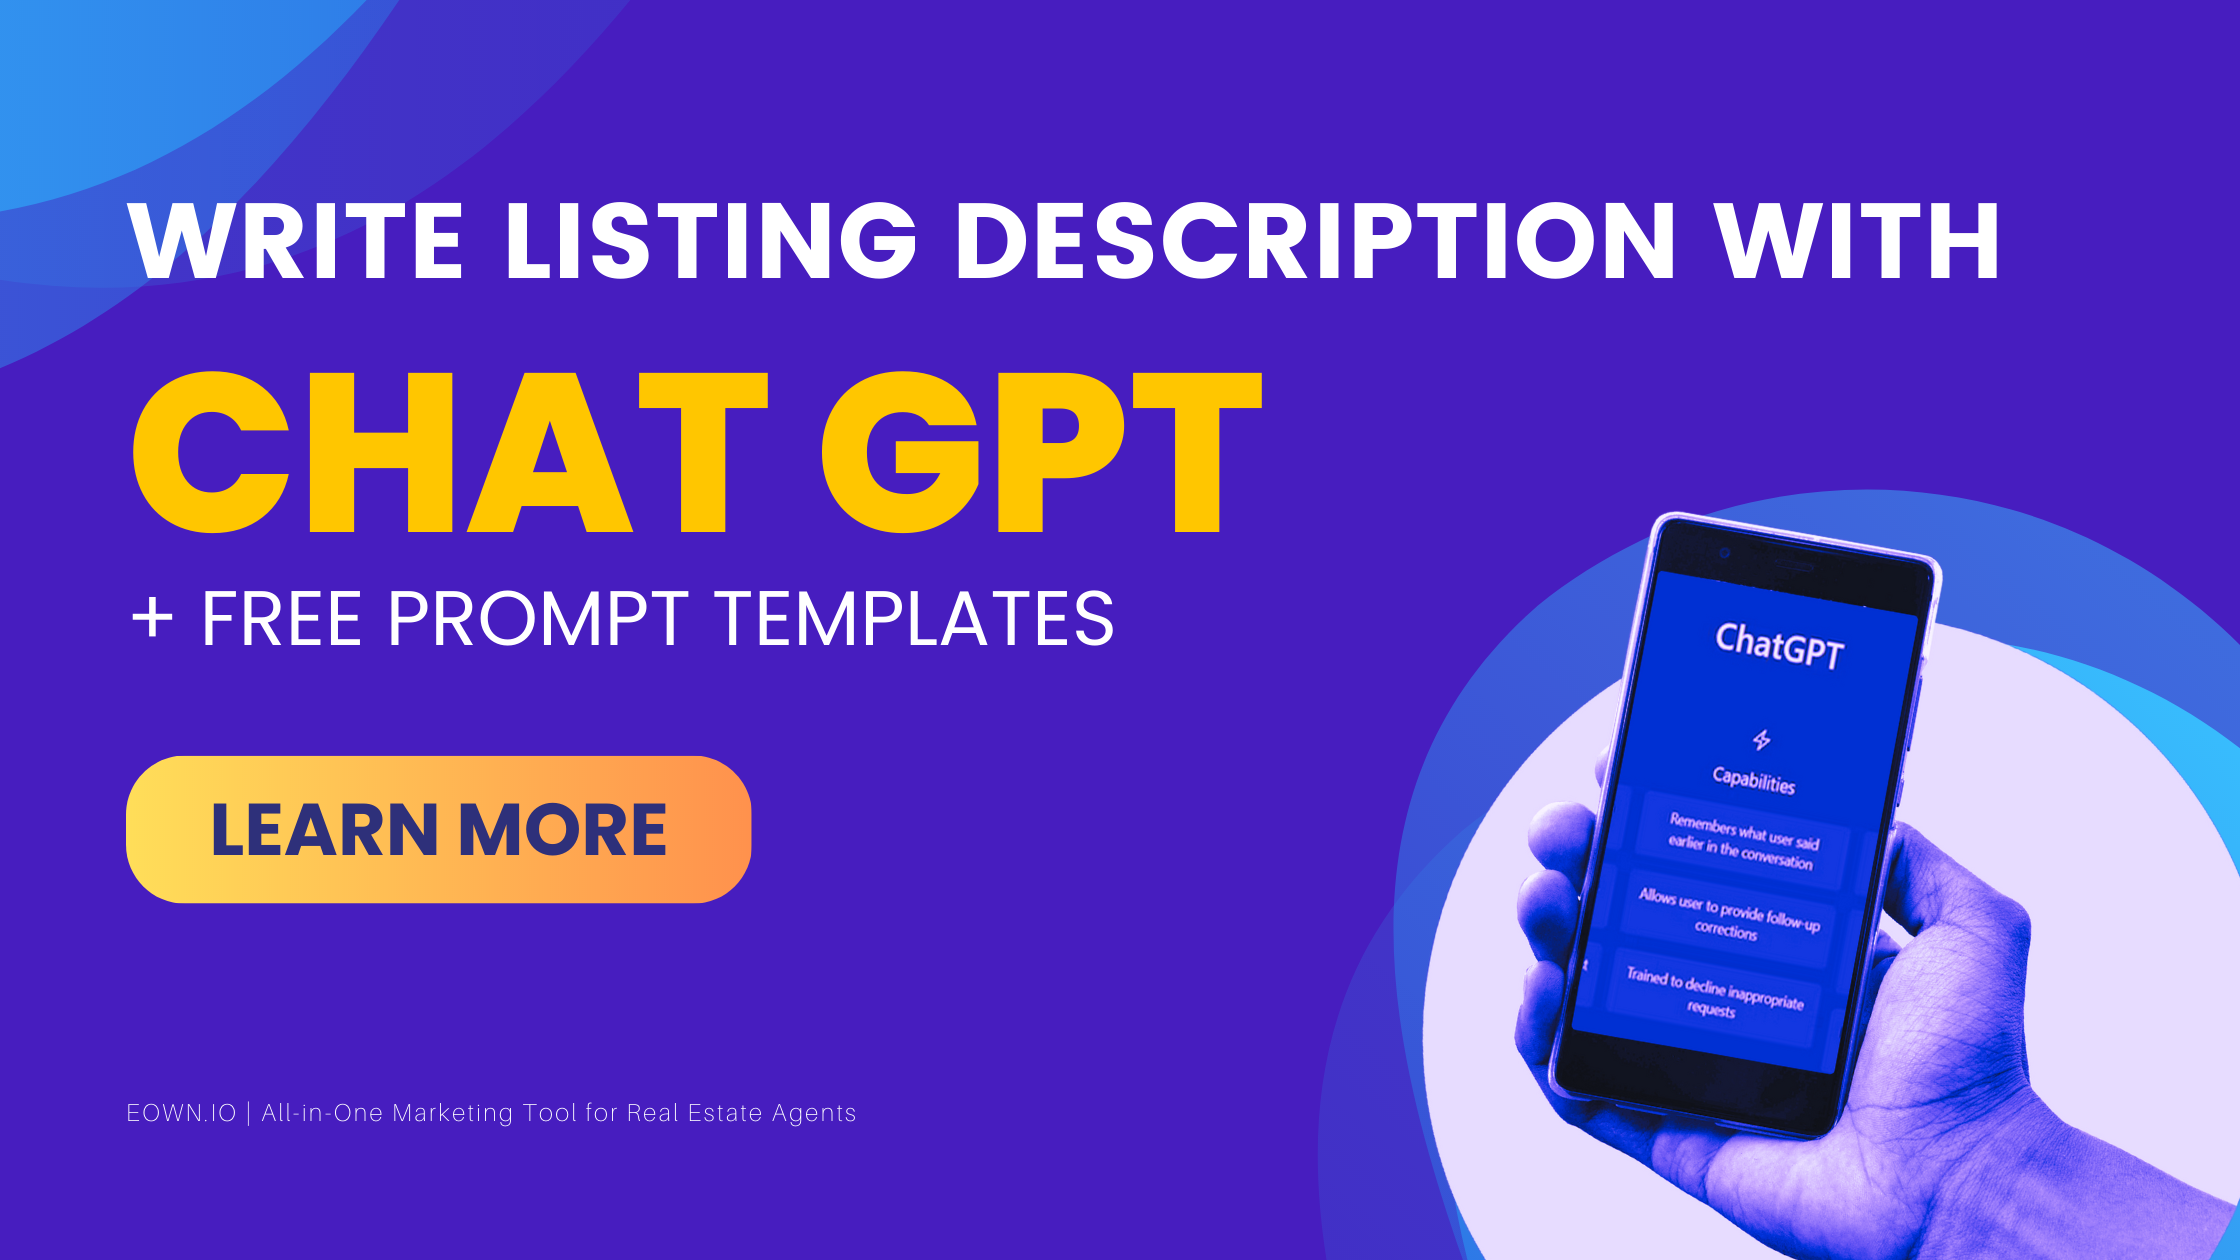 How to Write Listing Description with Chat GPT